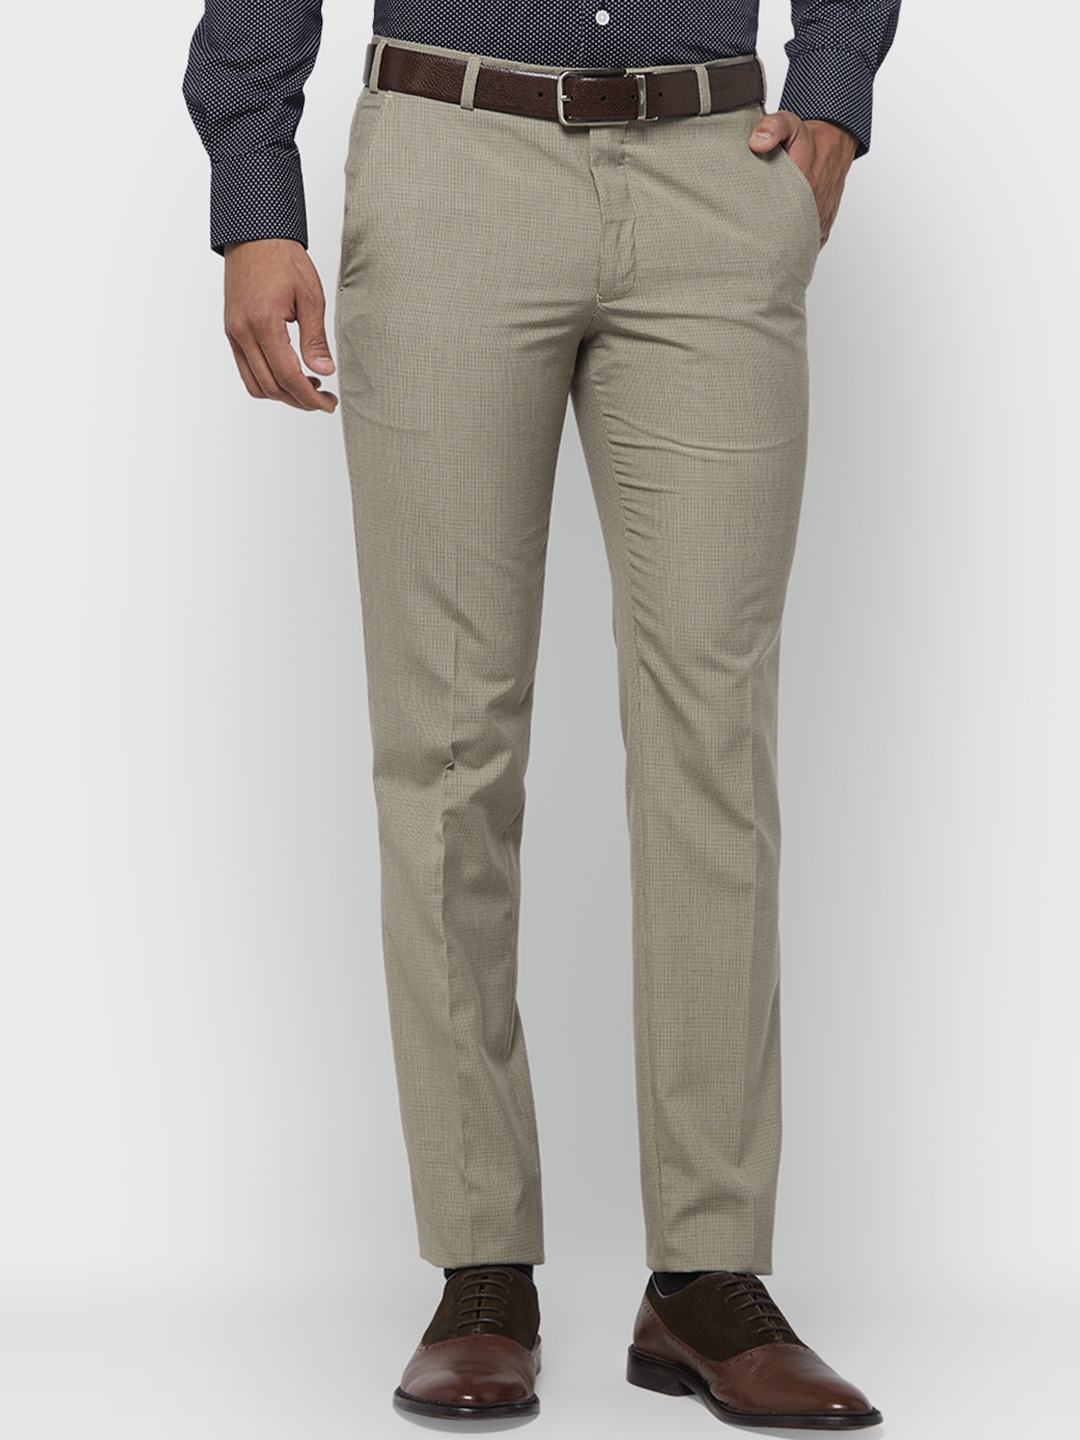 Mens Slim Fit Trousers  Mens Chino  Cord Trousers  Next Official Site